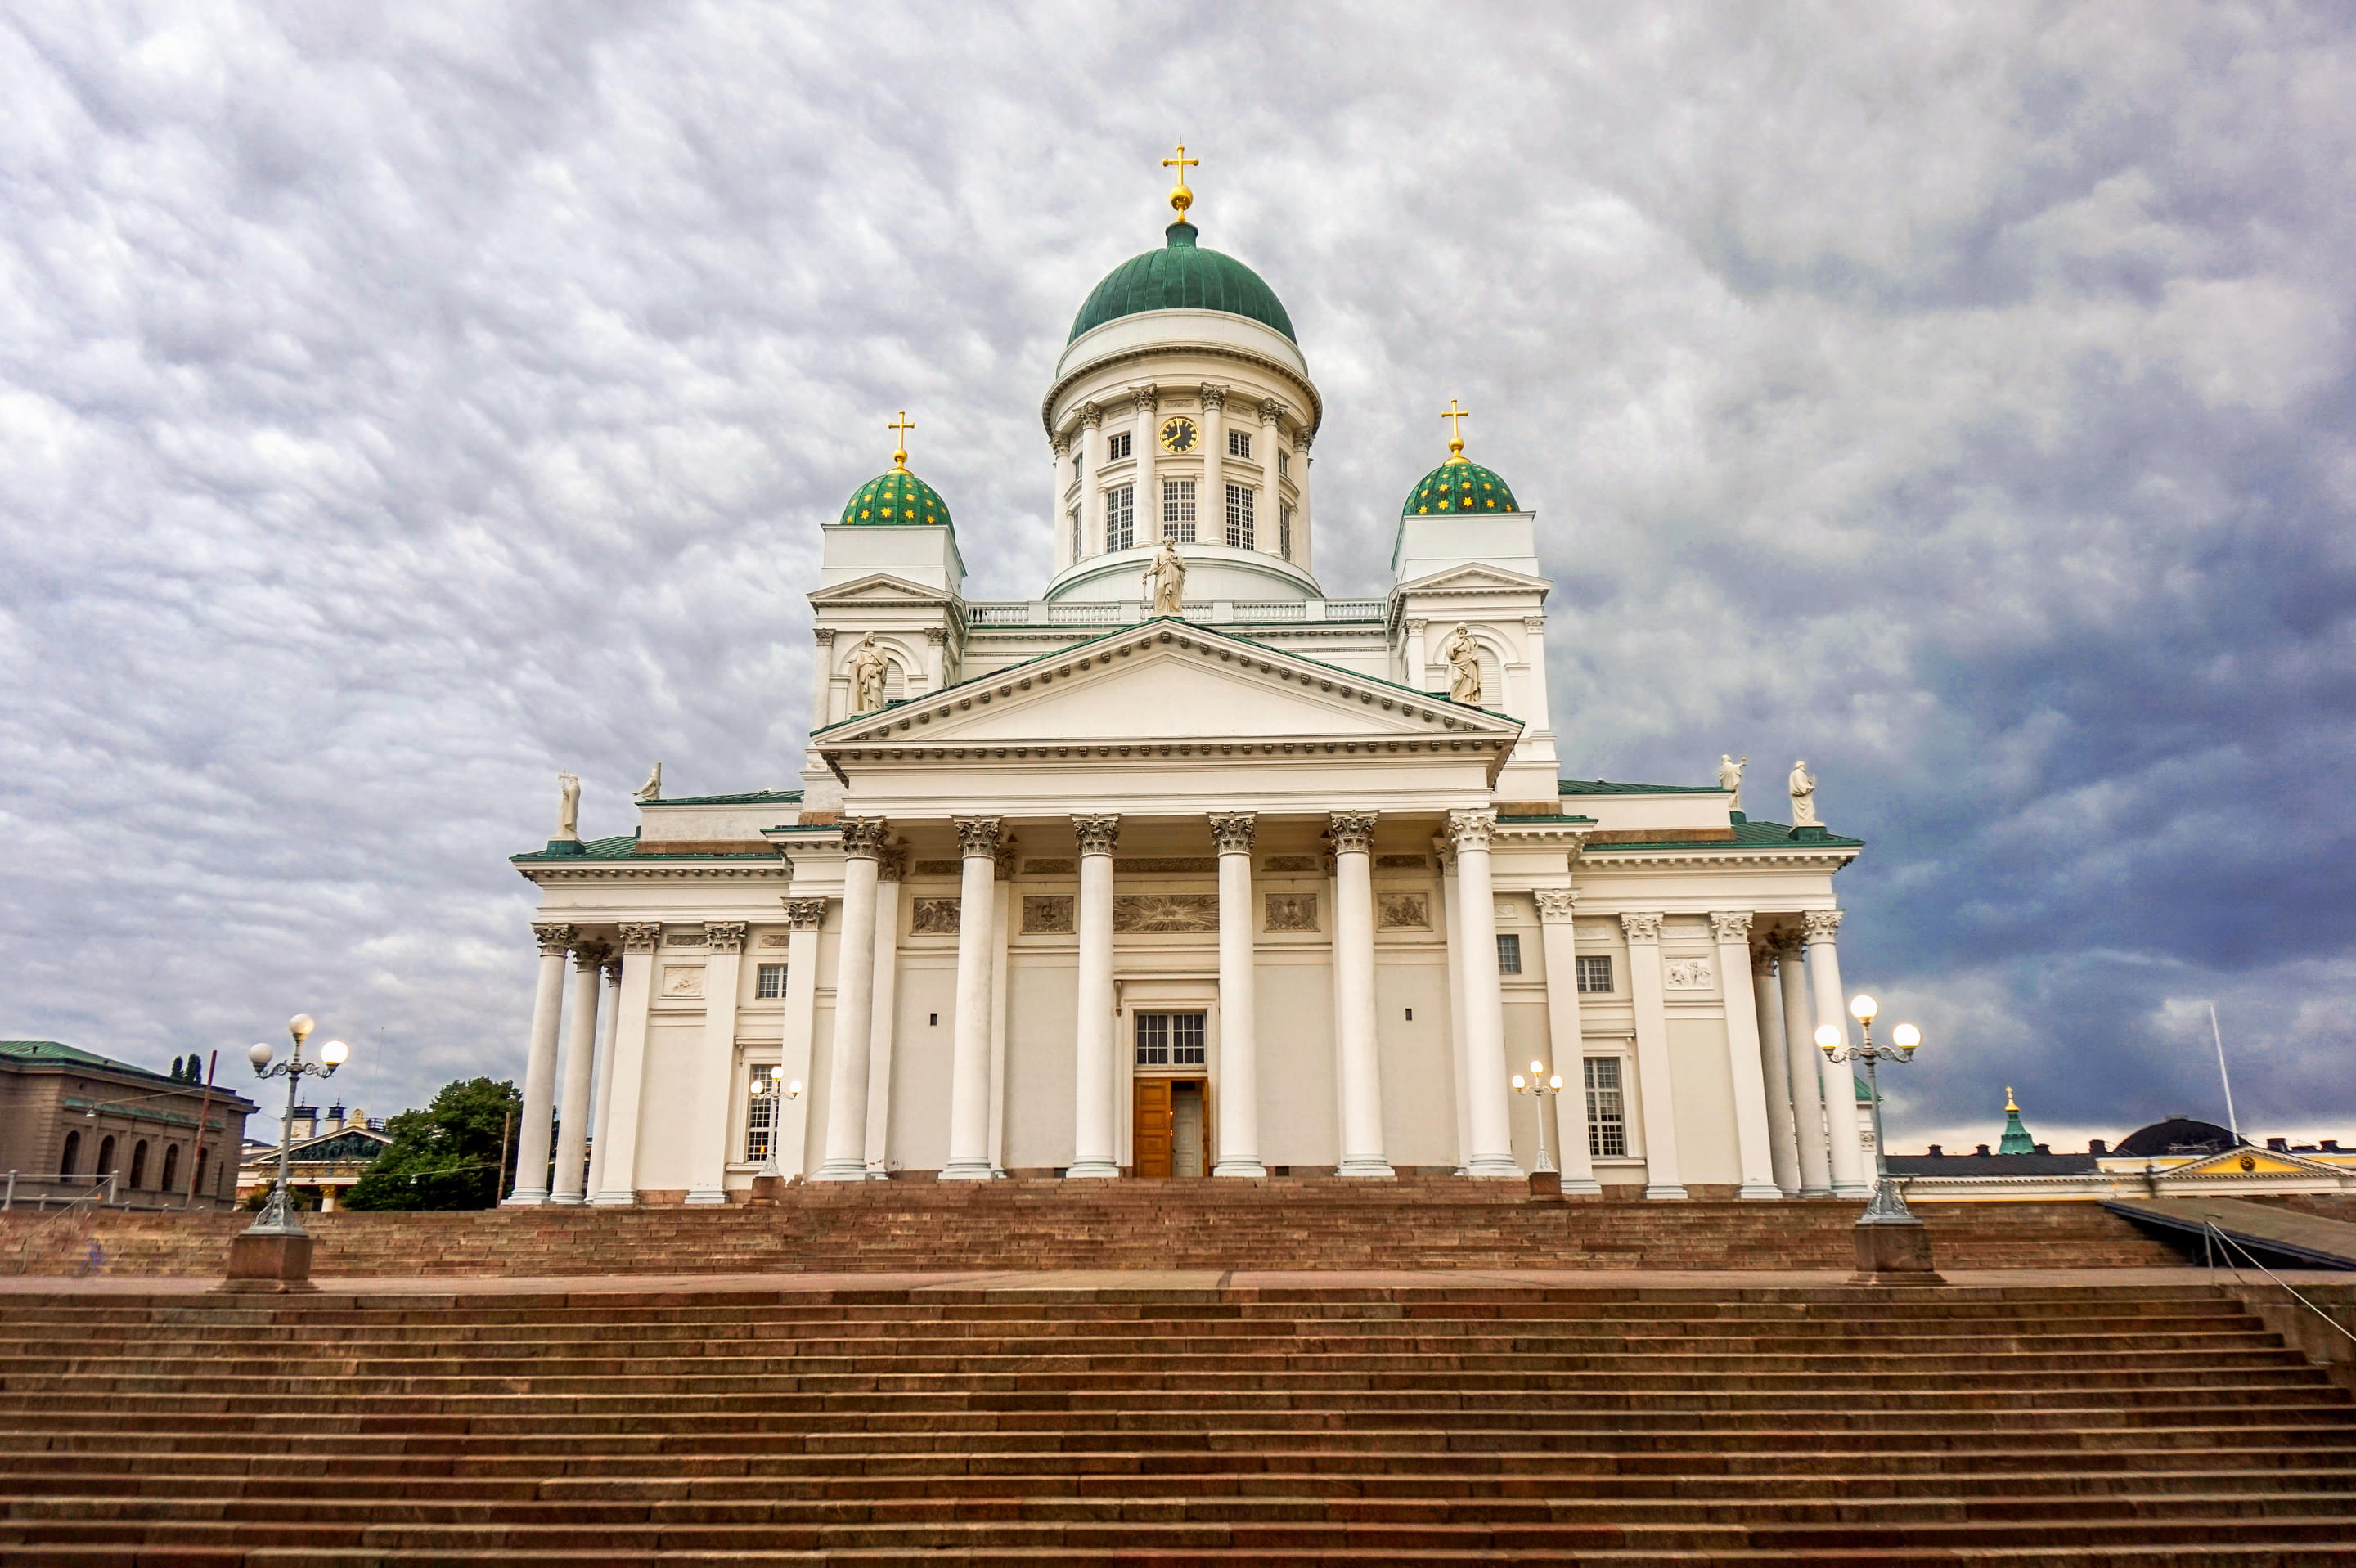 Helsinki Cathedral Overview